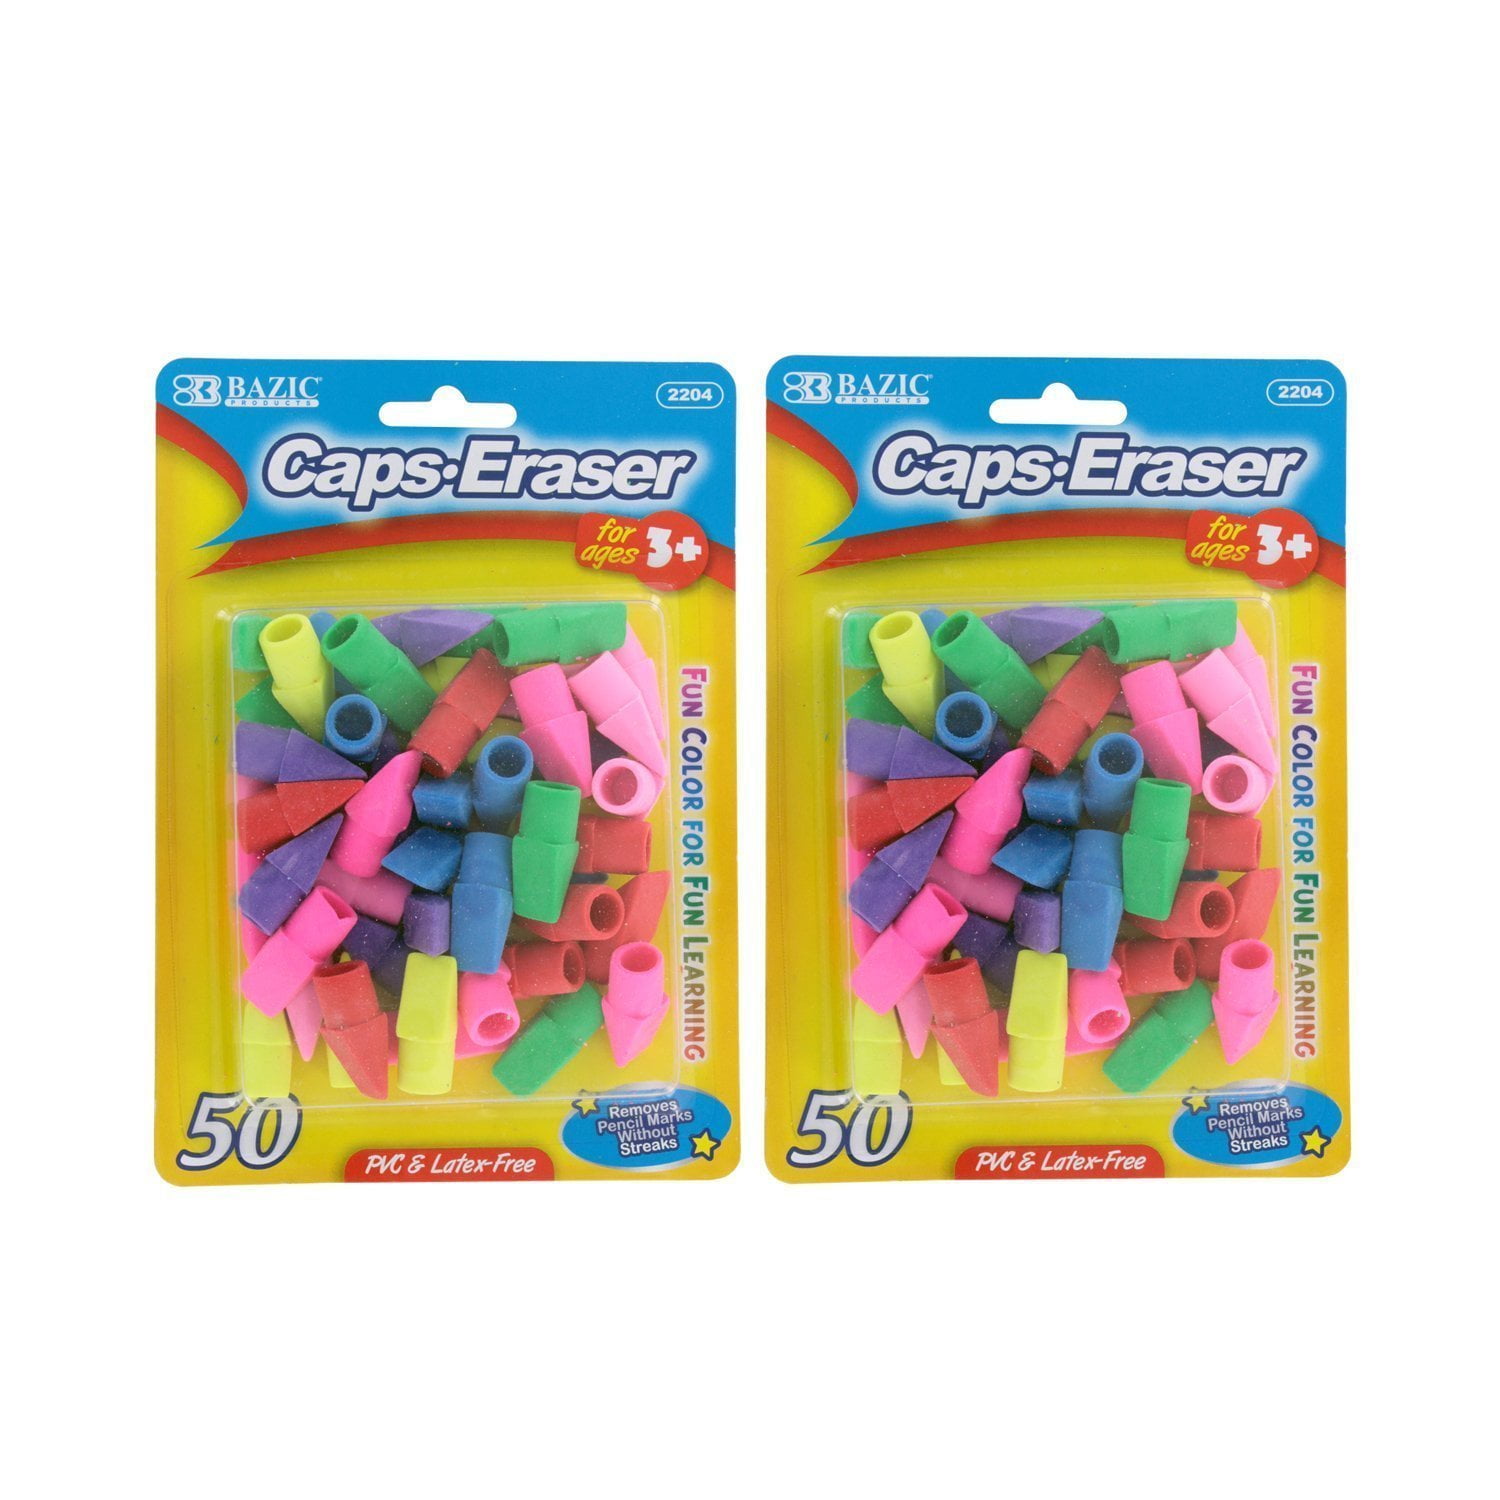 12 Pack Rubber Gun Erasers Assorted Colors 4 3/4" x 1 1/4" 